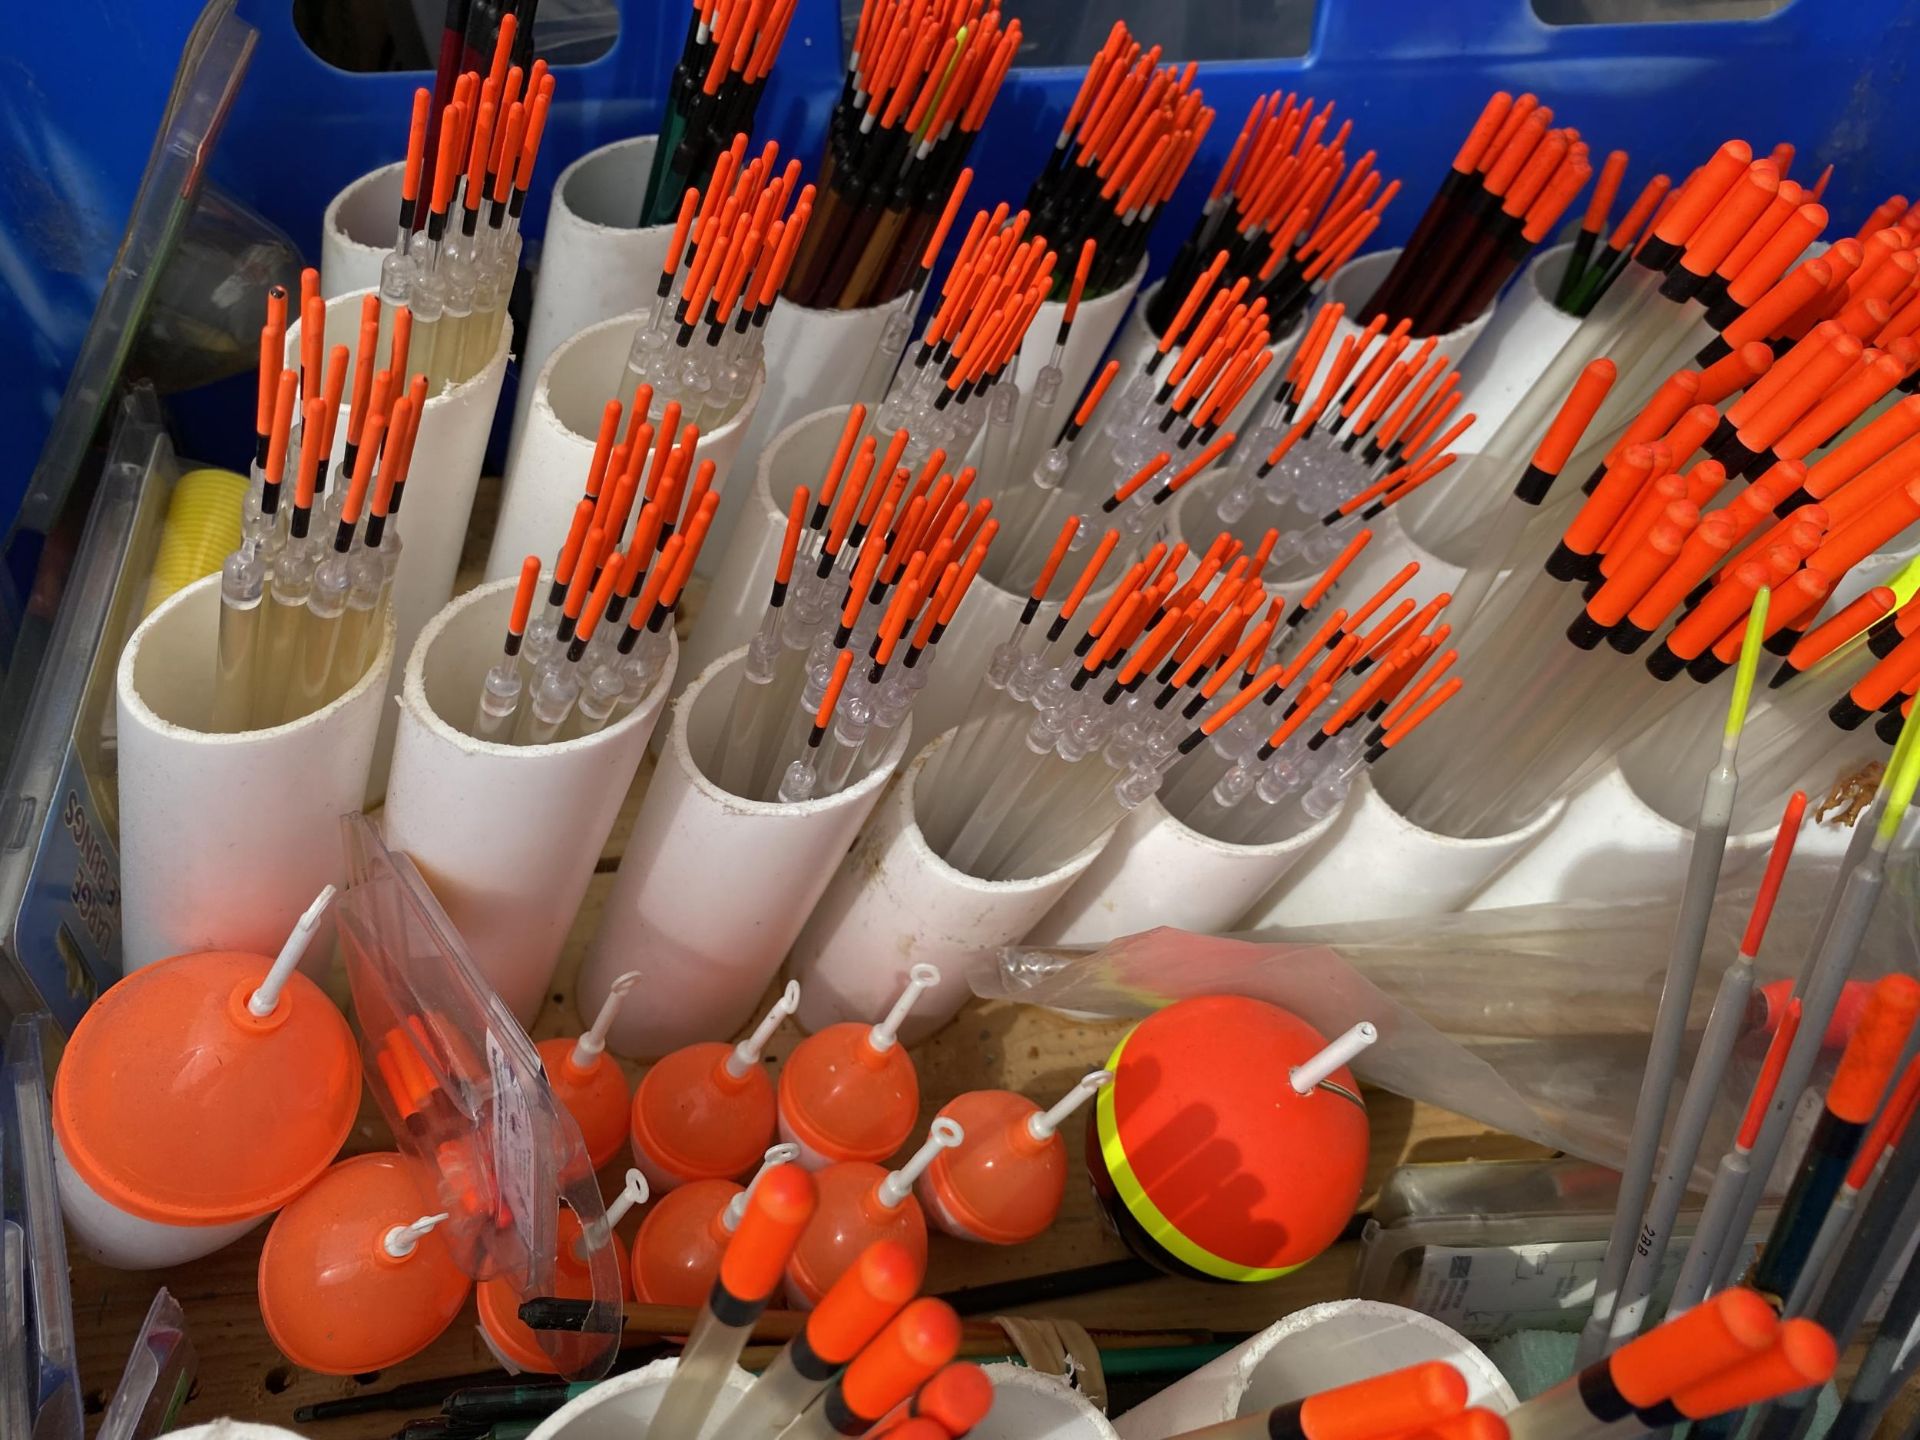 A LARGE ASSORTMENT OF VARIOUS FISHING FLOATS (FROM A TACKLE SHOP CLEARANCE) - Image 2 of 3